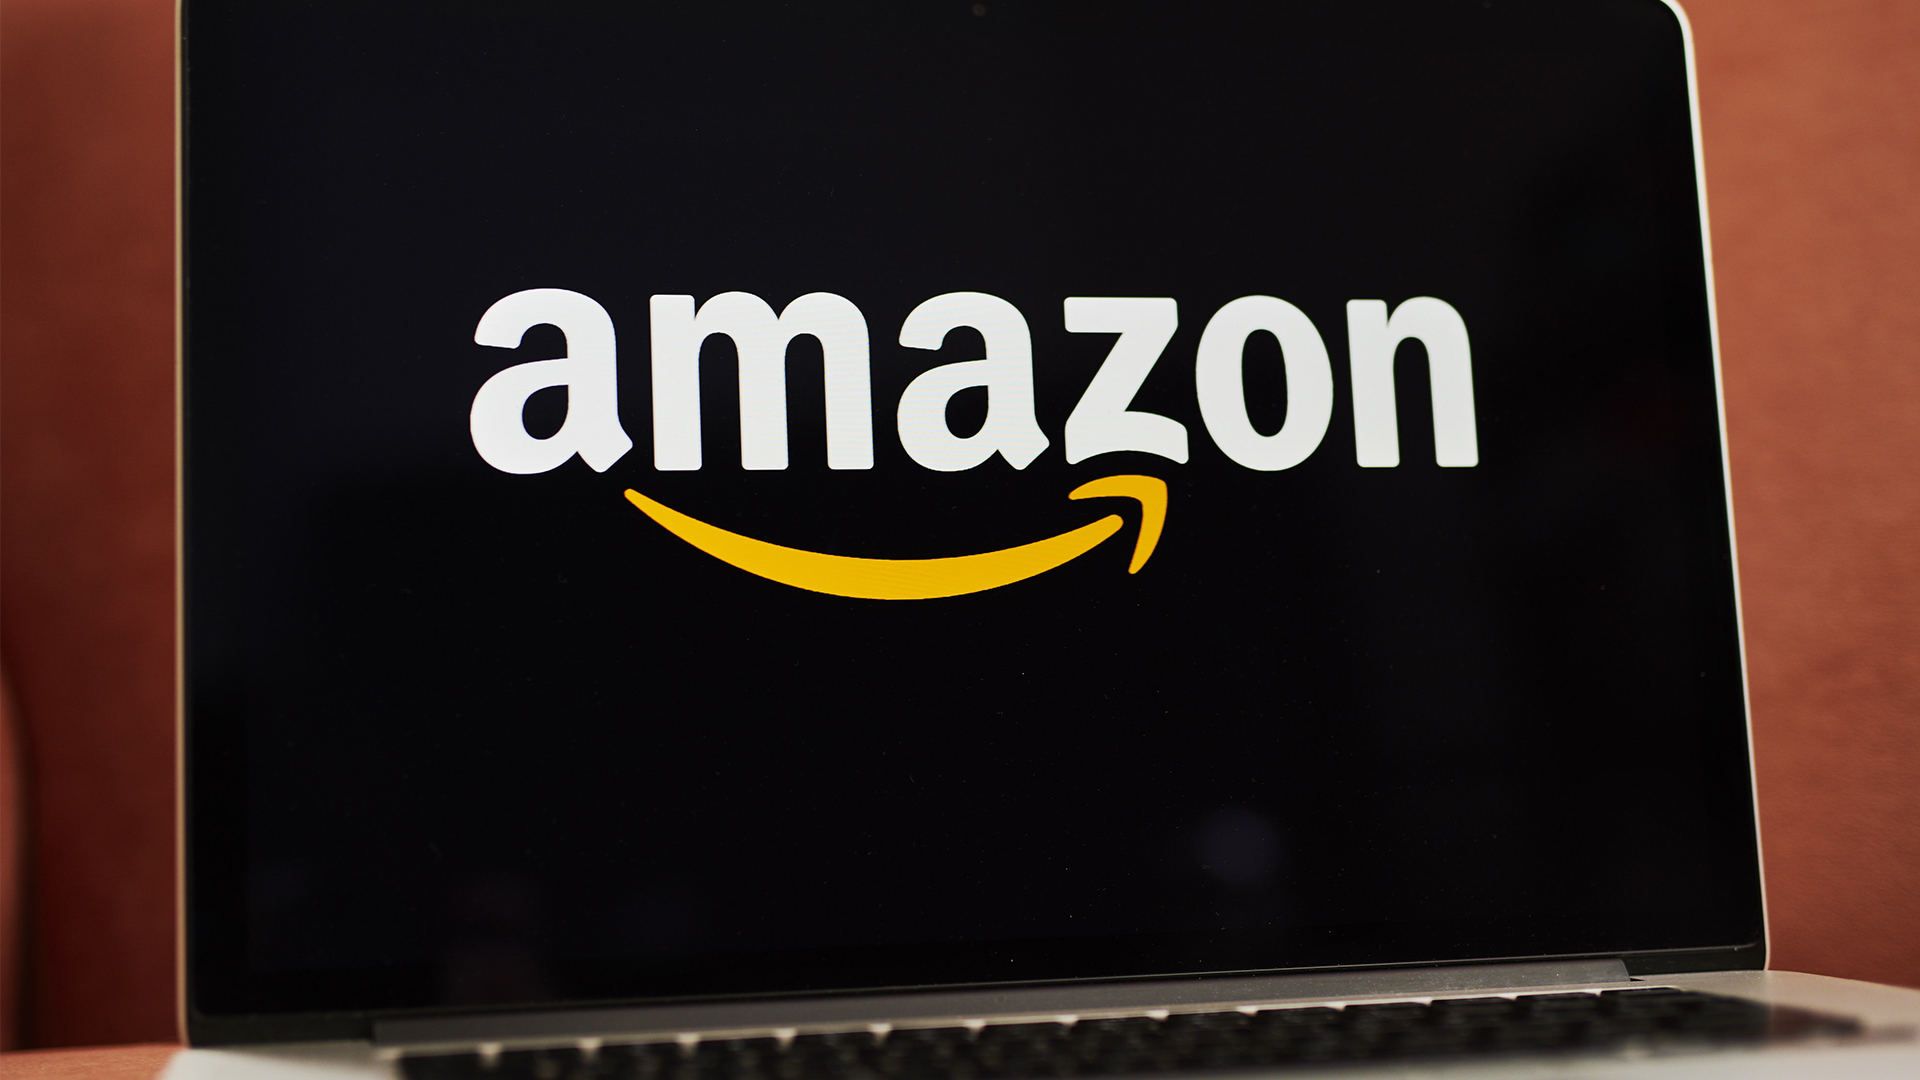 Could Amazon Soon Accept Cryptocurrency As Payment? Speculation Sends Bitcoin Surging